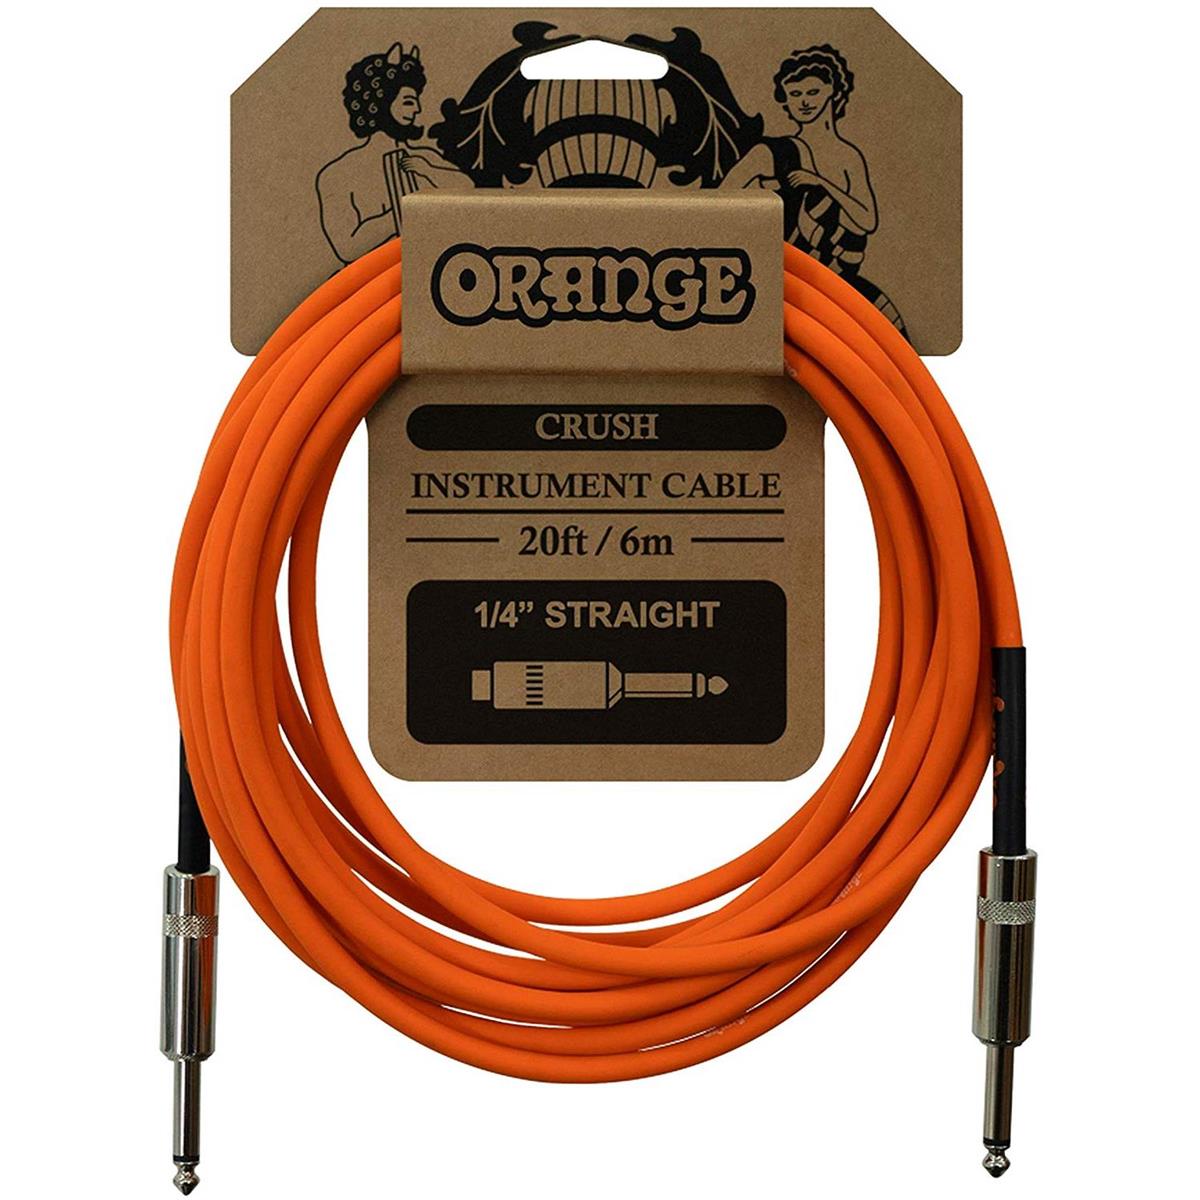 Photos - Cable (video, audio, USB) Orange Crush 20' Instrument Cable with Straight to Straight Connector, Ora 